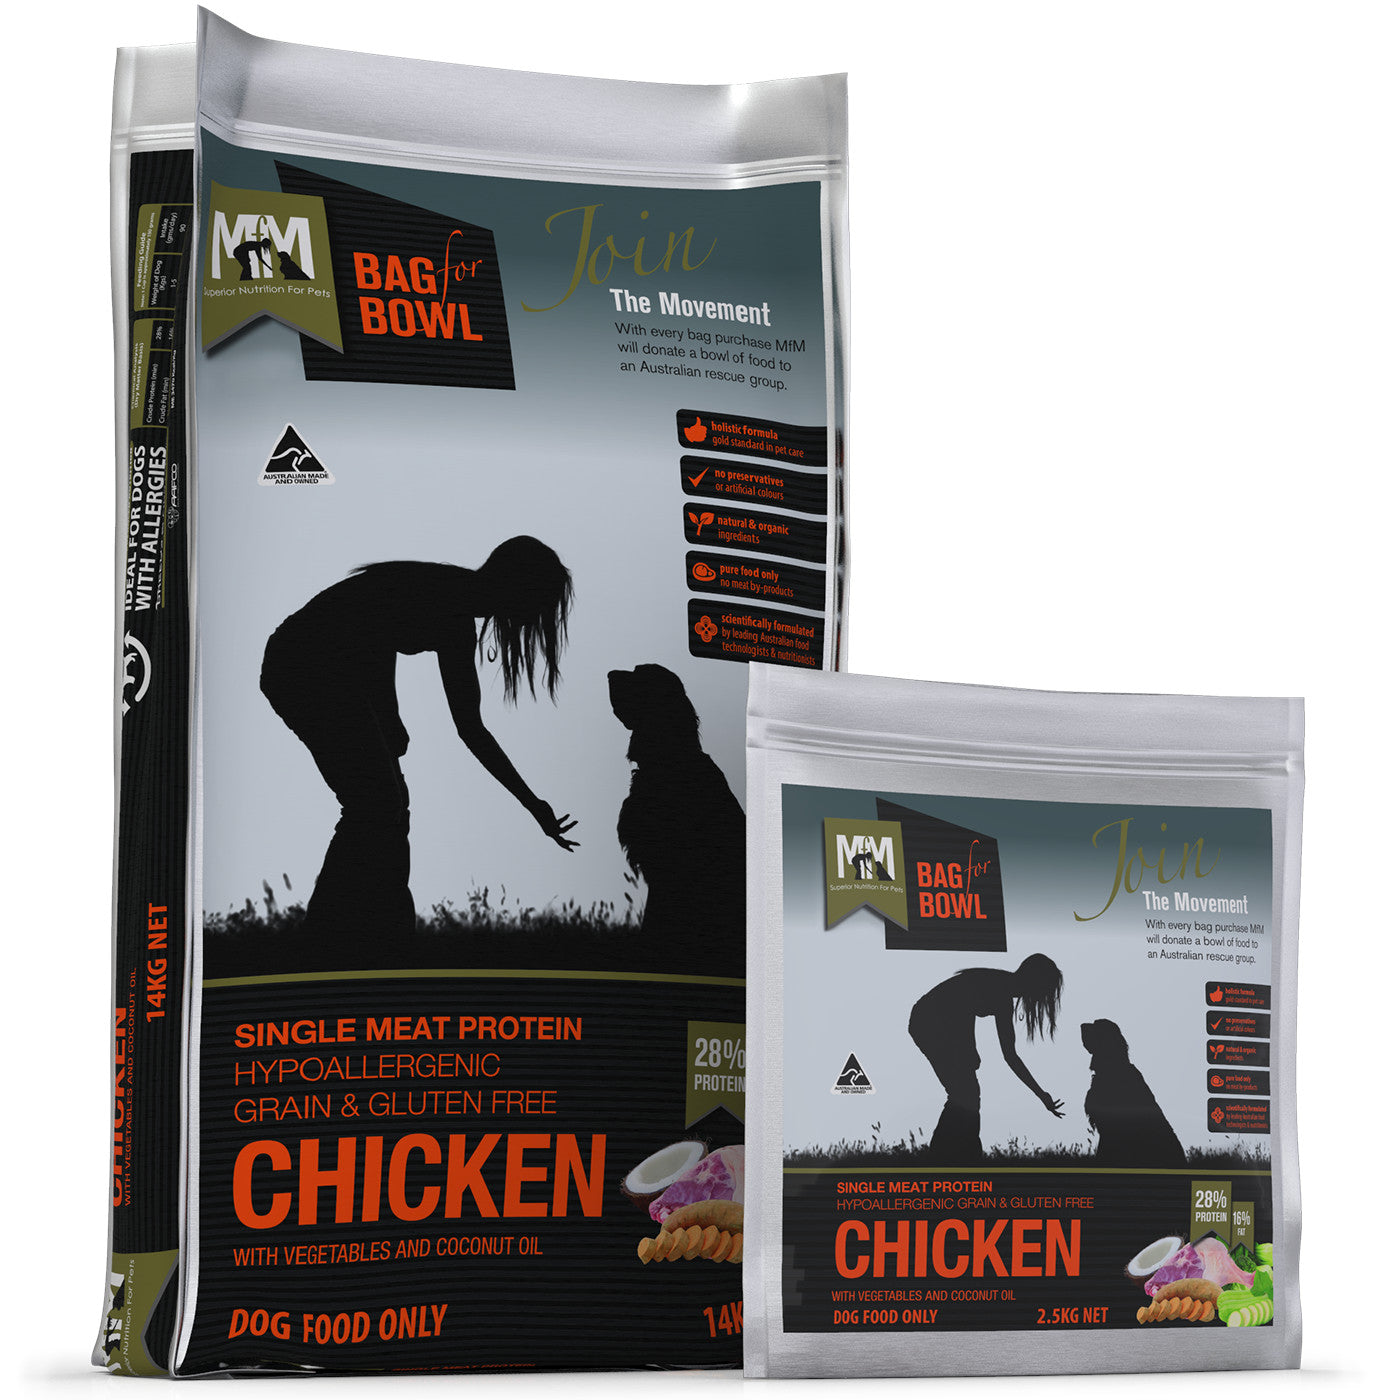 Meals for Mutts Chicken Single Meat Protein Dog Food.